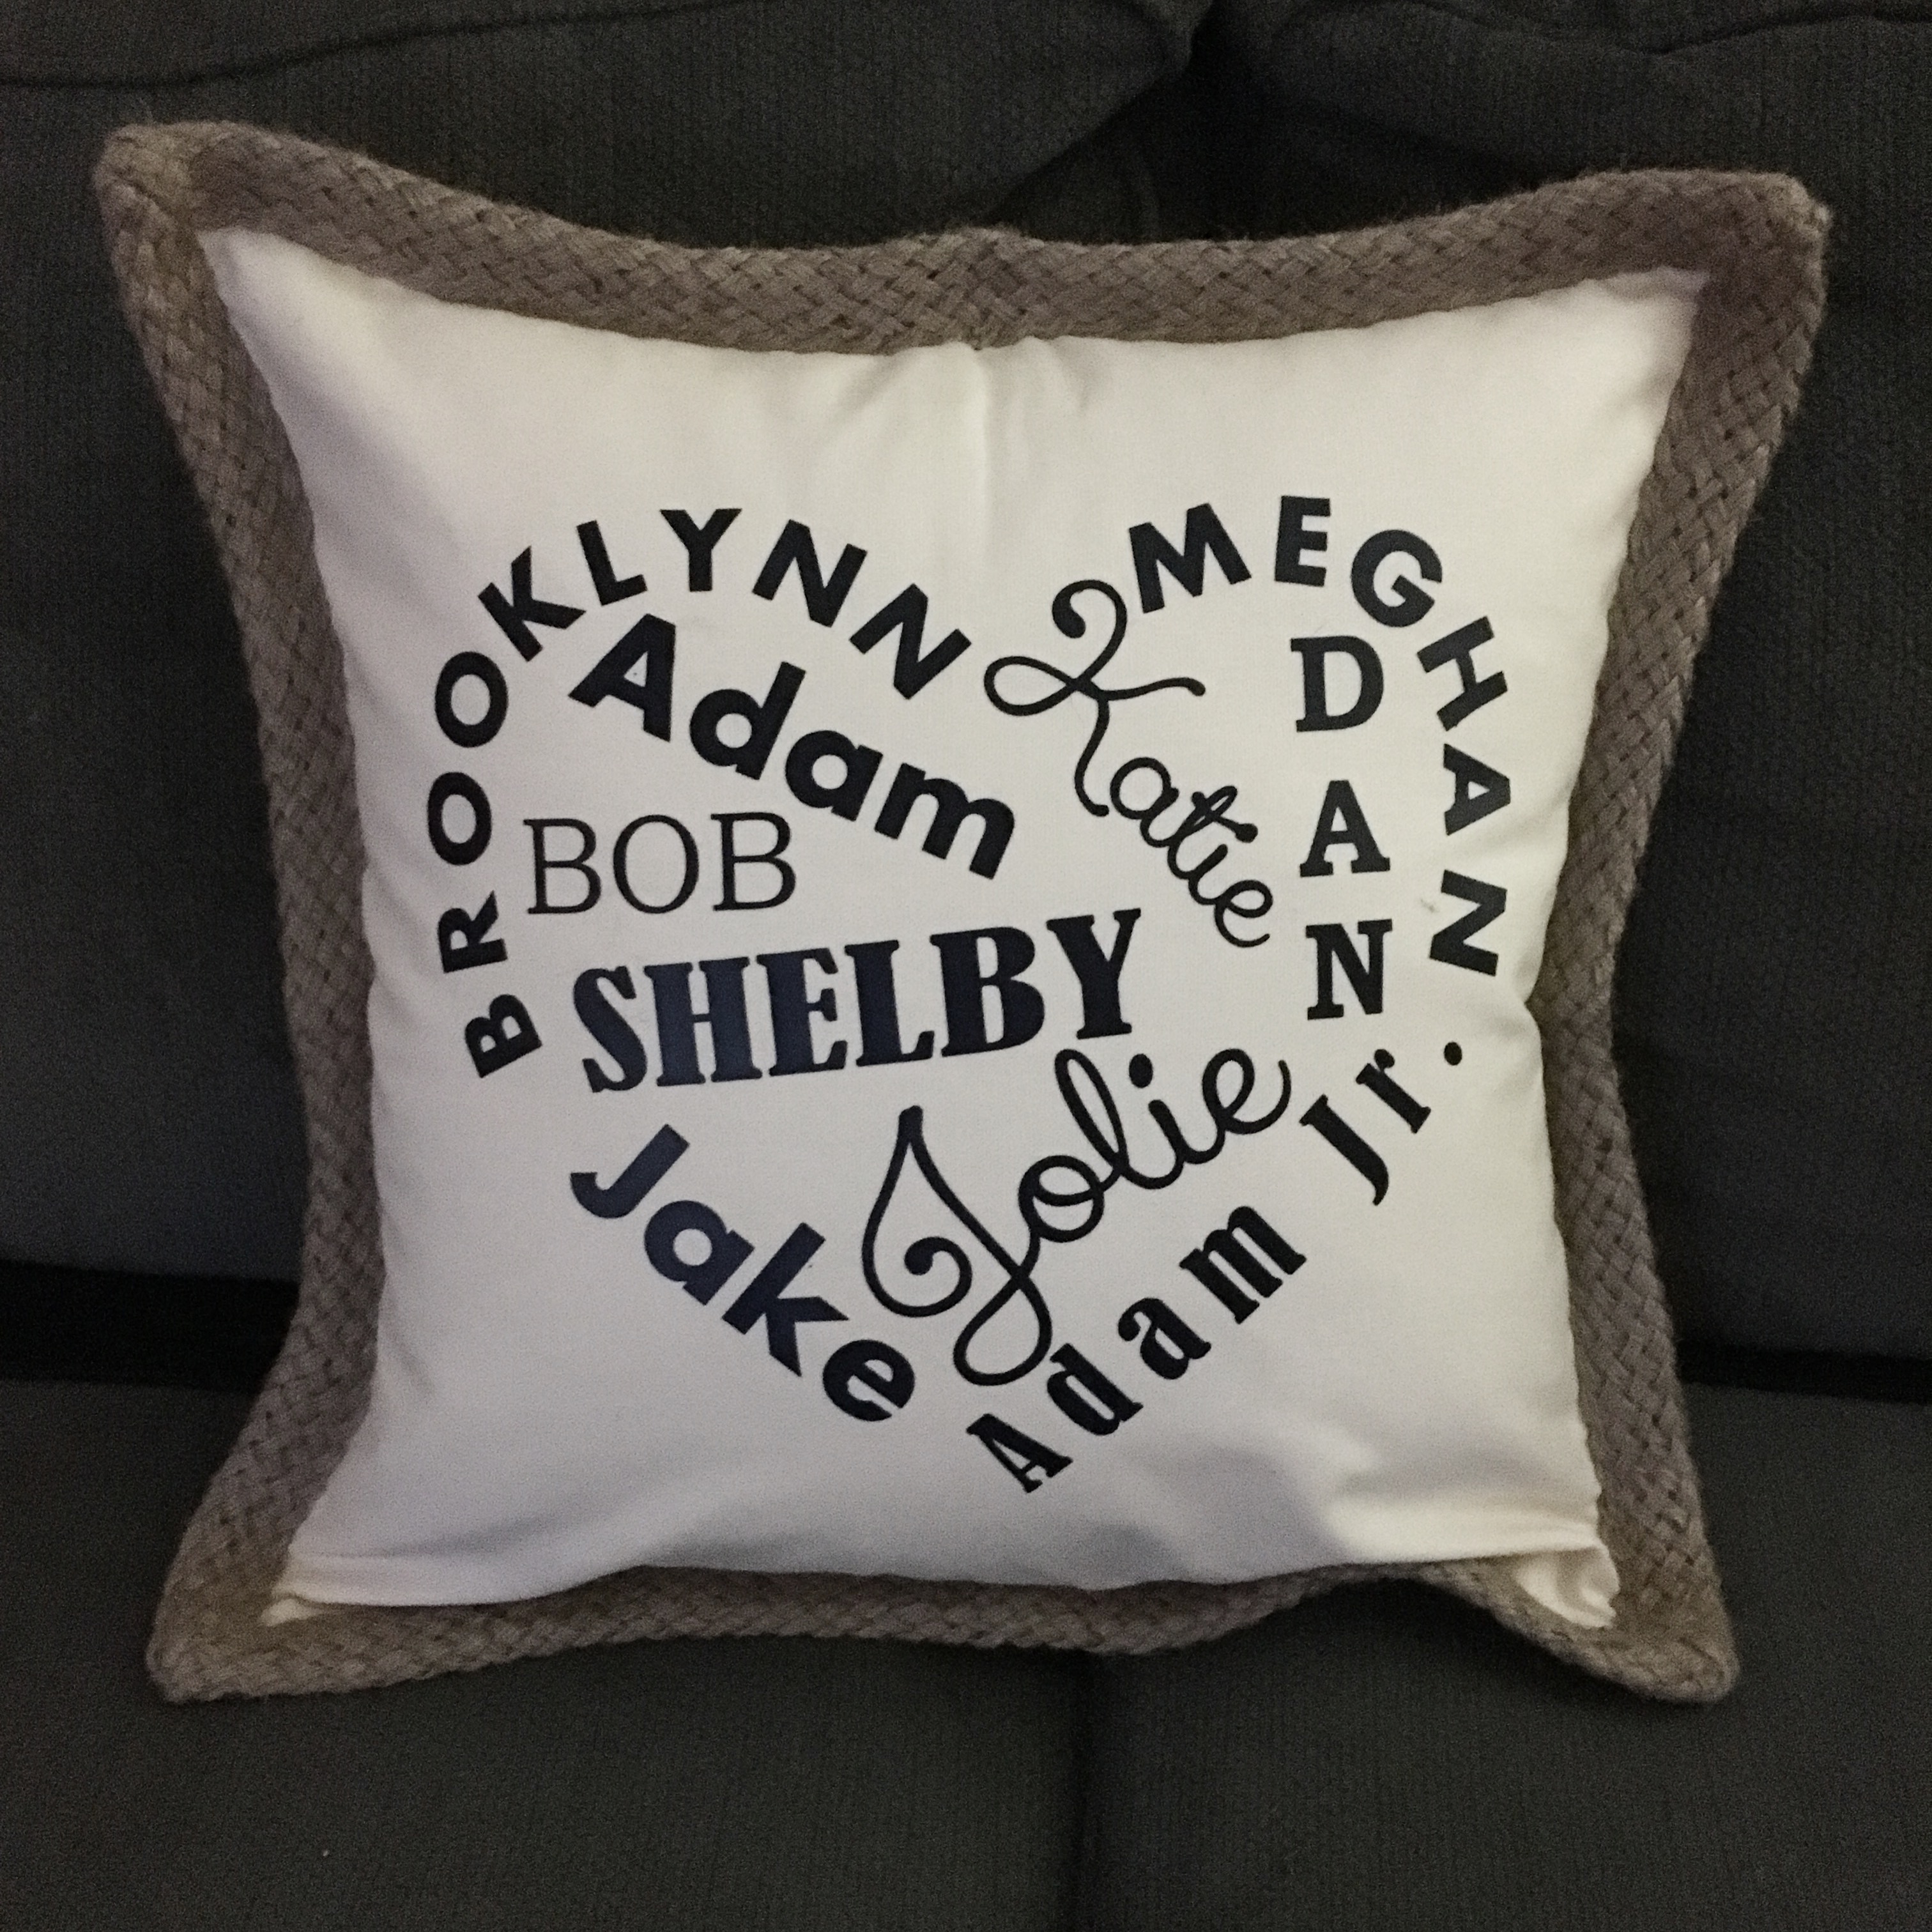 personalized heart pillow